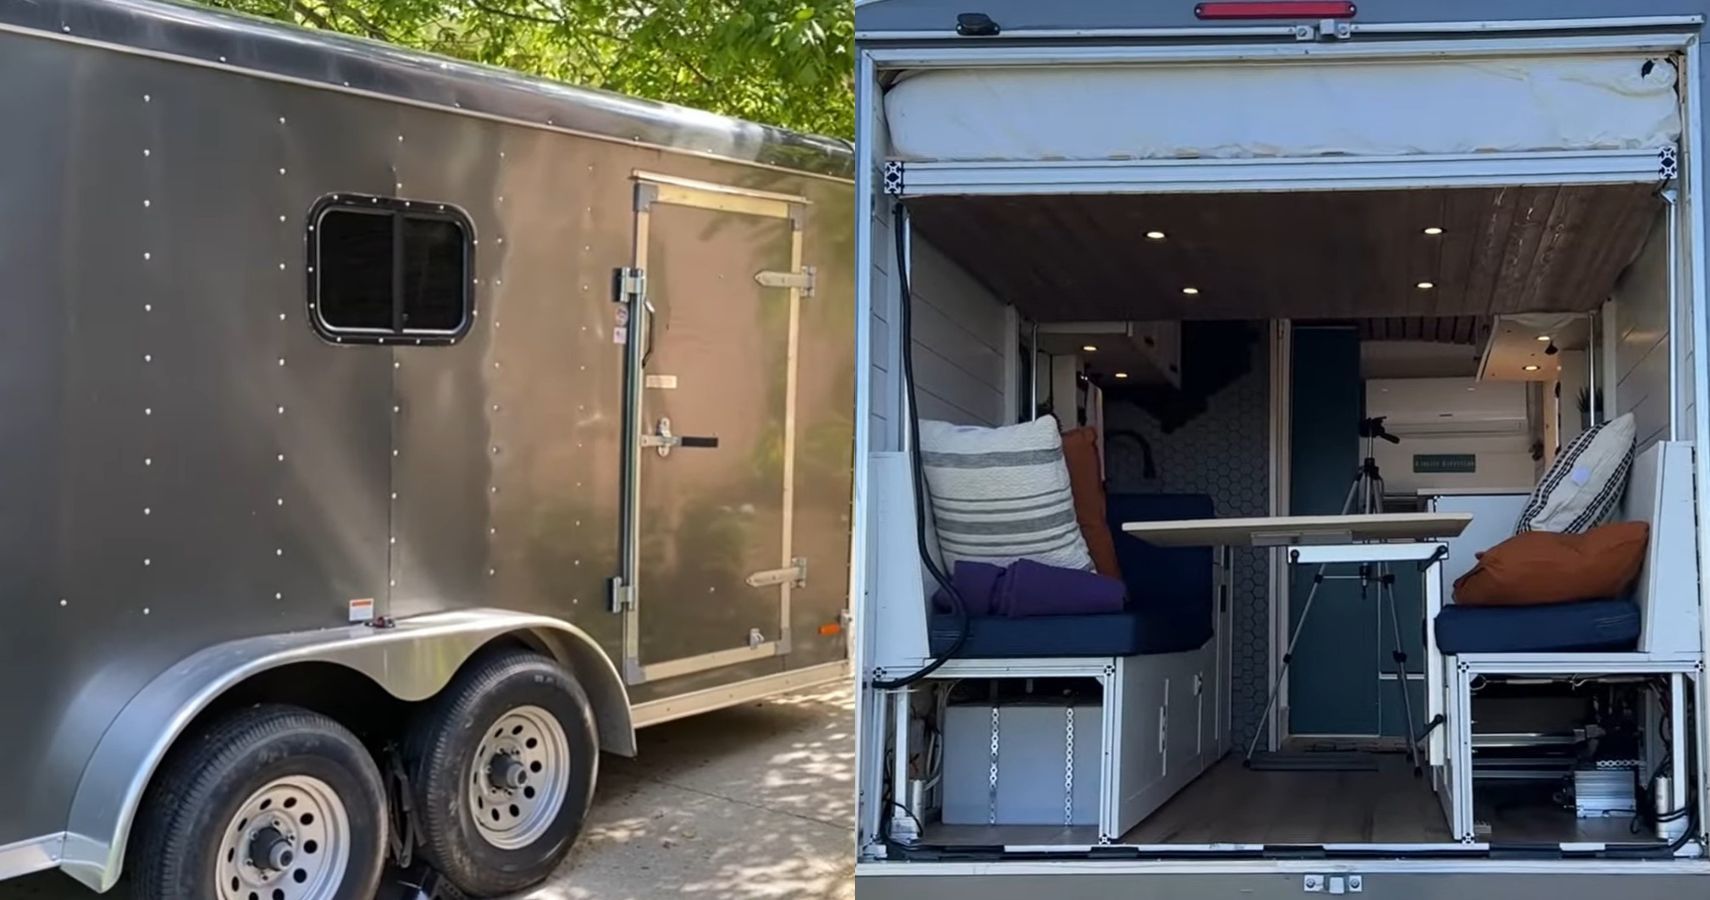 This Cargo Trailer Camper Conversion Is An Apartment On Wheels